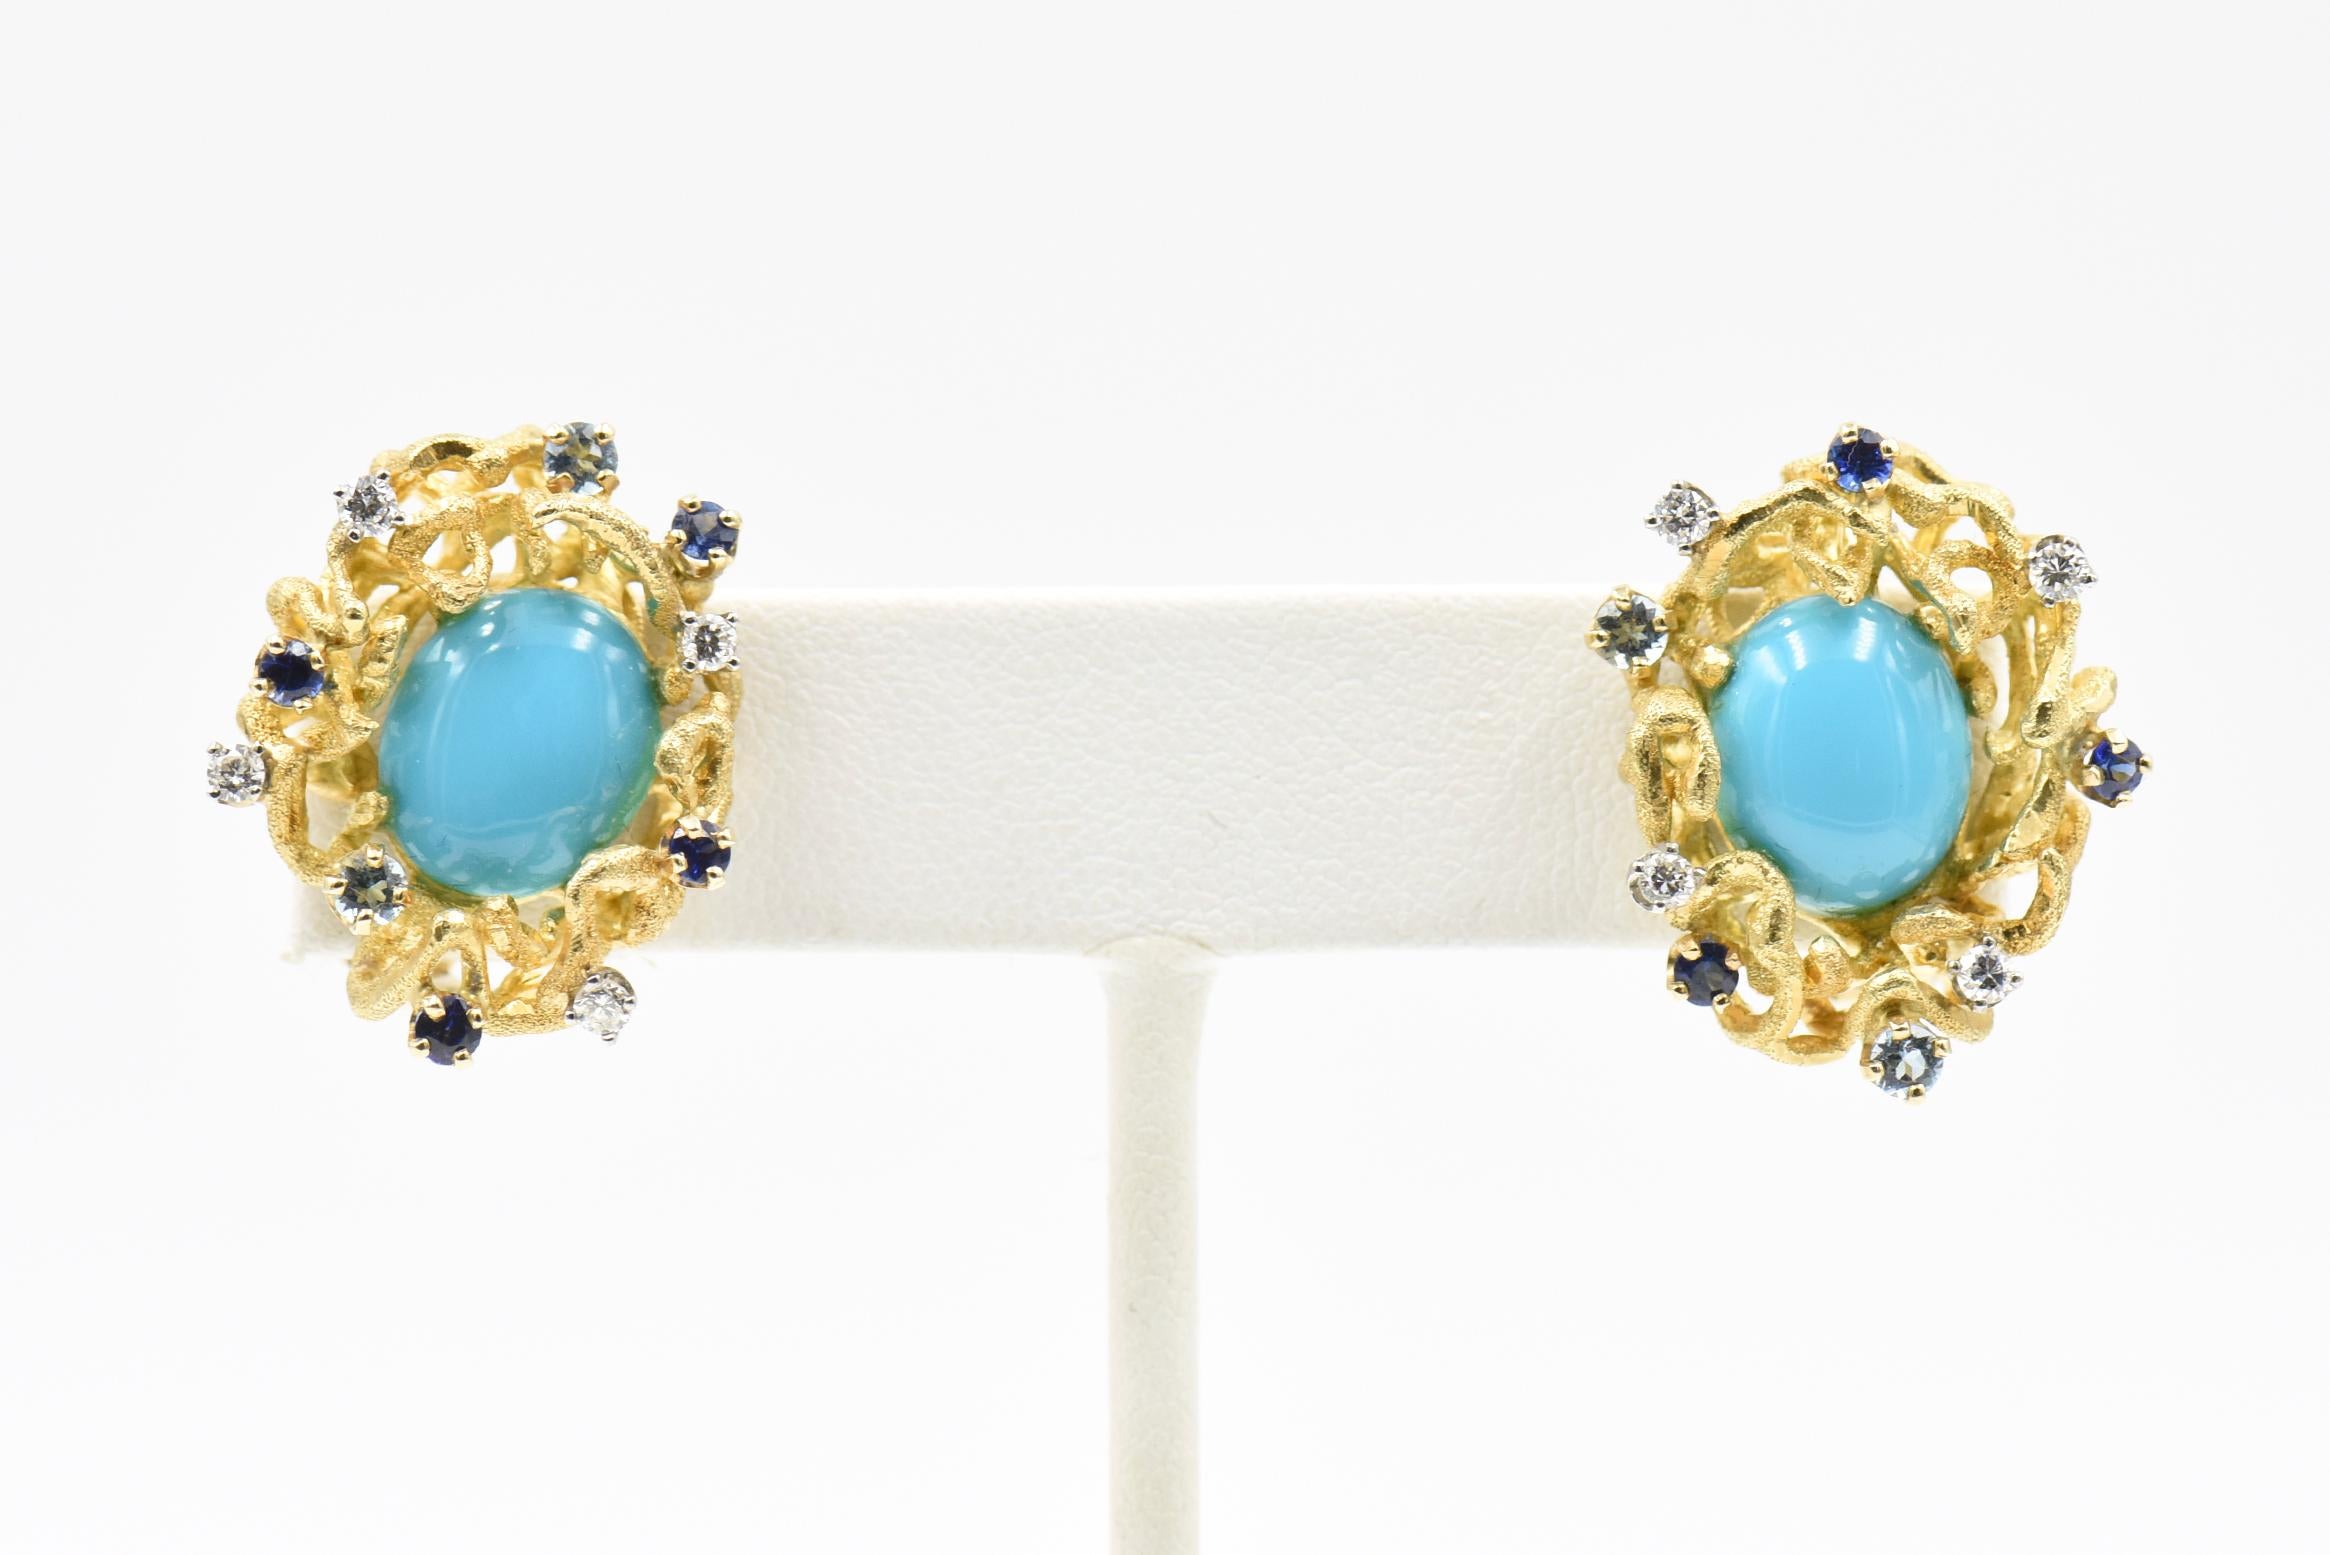 Wonderful 1960's earrings by Jack Gutschneider have a turquoise cabochon mounted in a freeform 14k gold nest with sapphires, diamonds and blue topaz prong set in the gold.   The earrings are clips with posts.  Earrings are 1